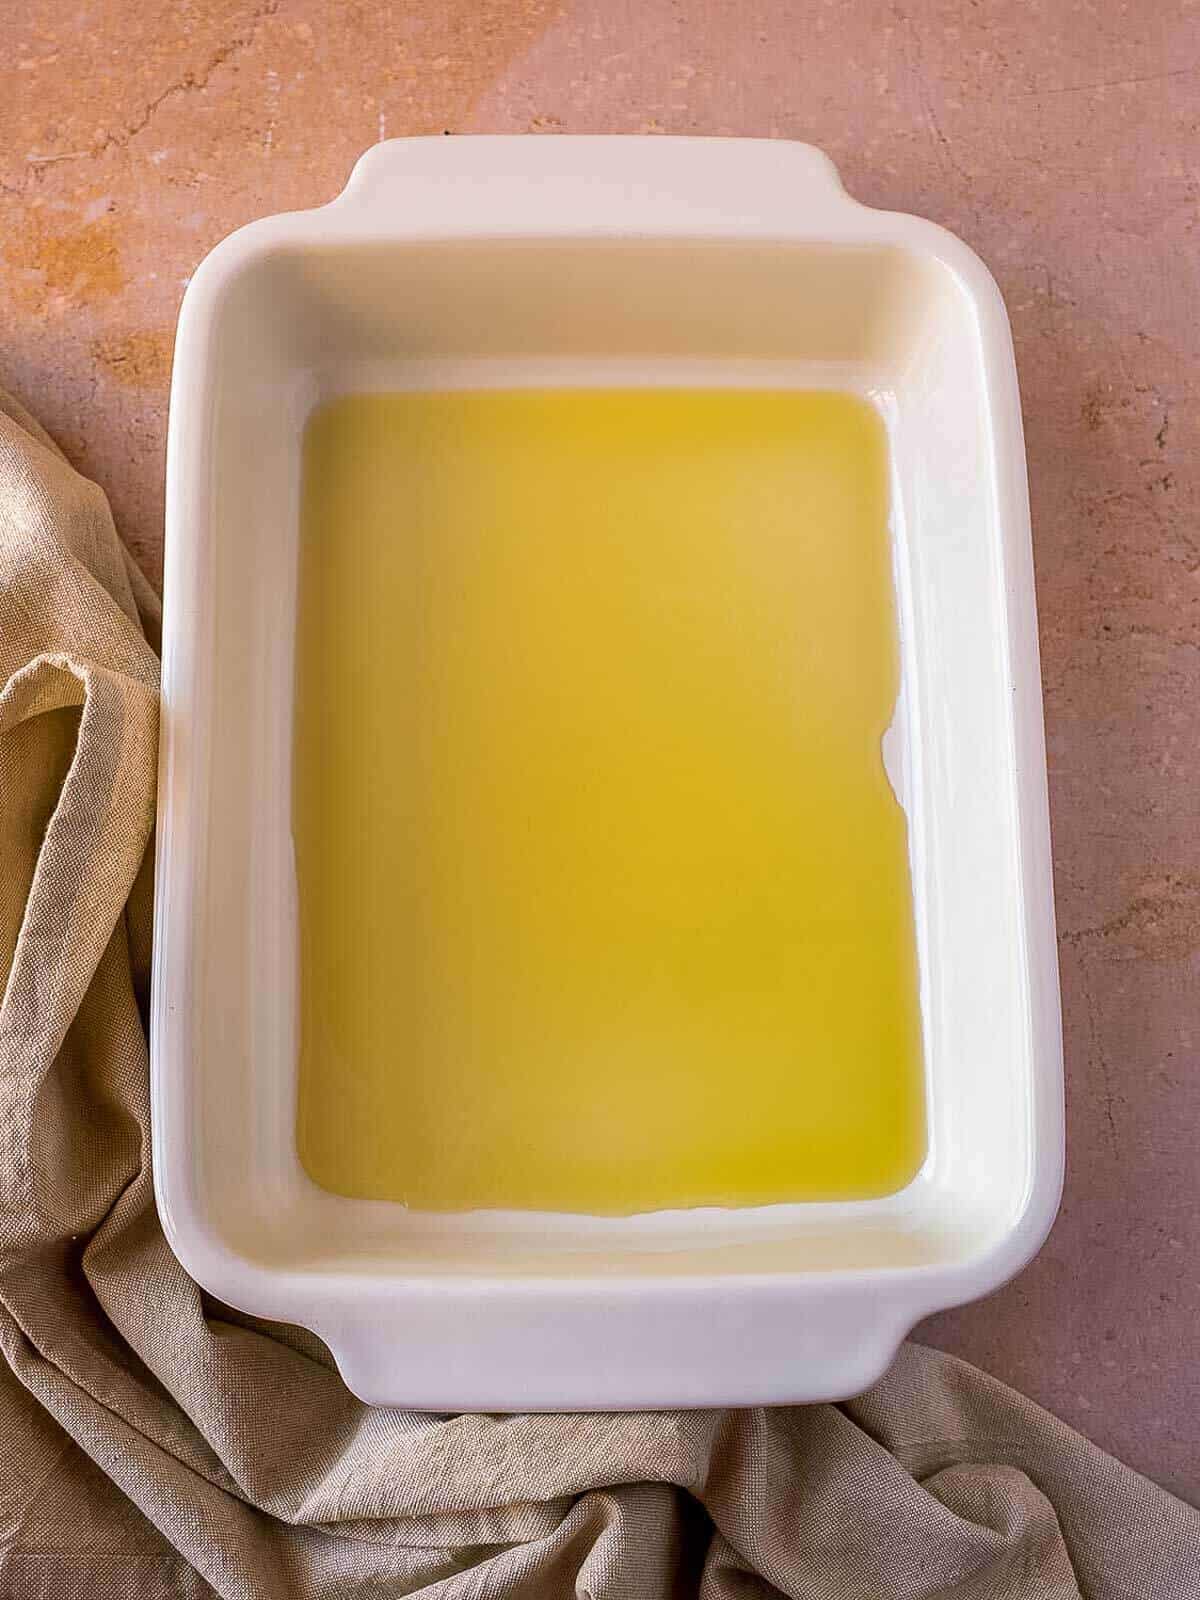 heat olive oil in a baking dish.